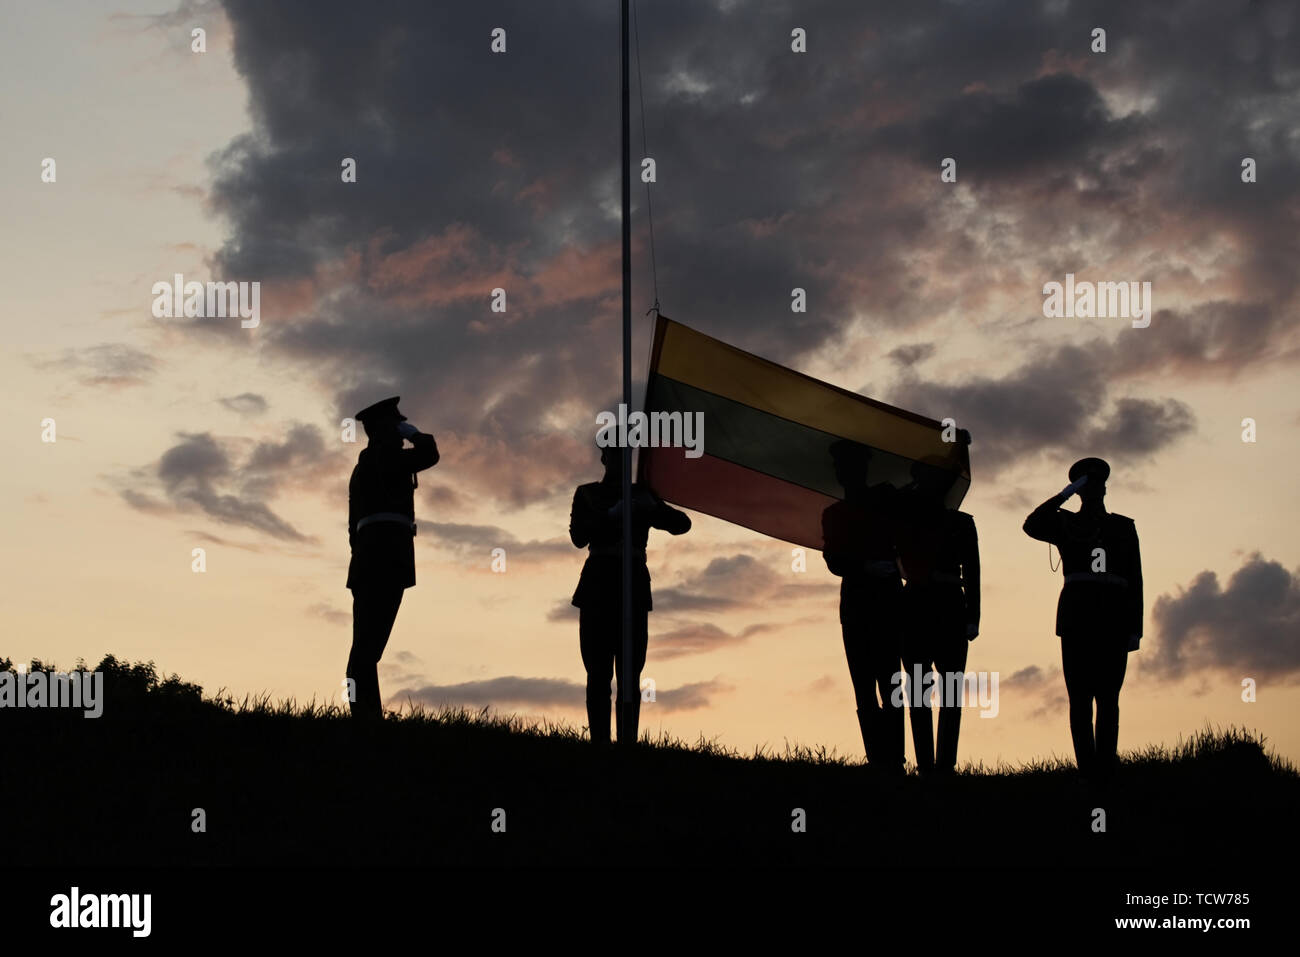 Soldiers Raising The Lithuanian Flag At evening Sunset Stock Photo